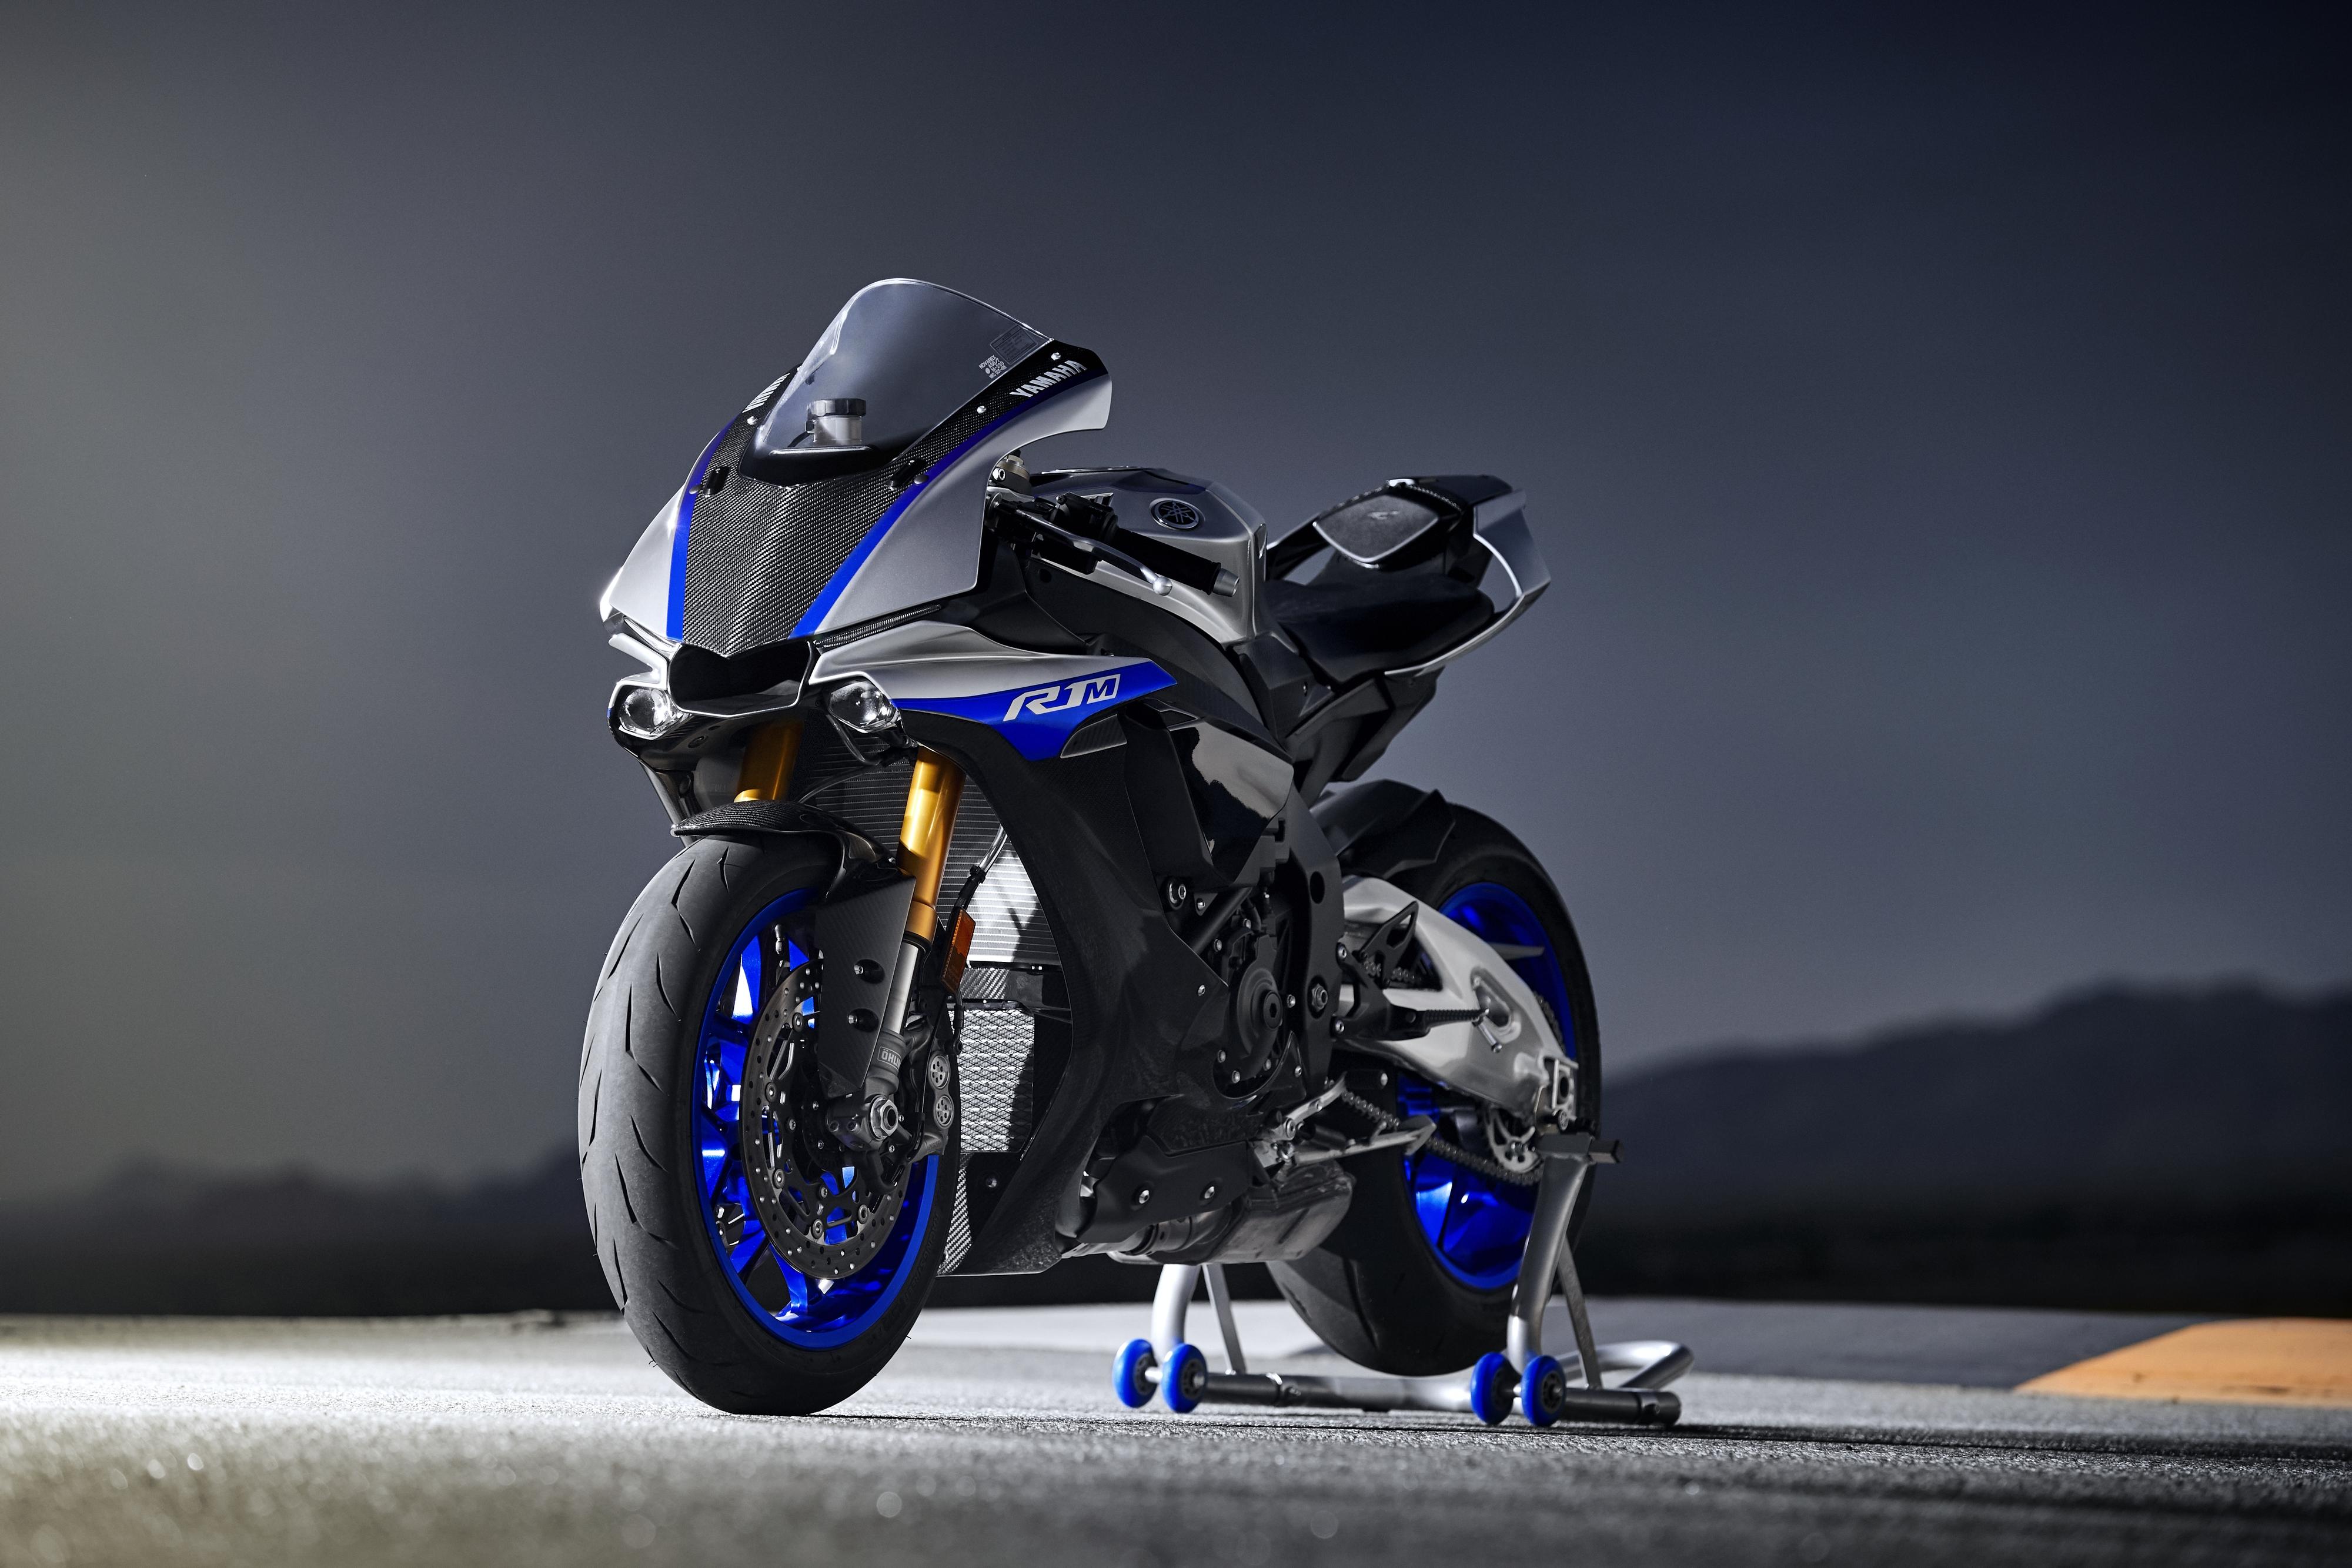 yamaha r15 hd wallpapers 1080p,motorcycle,vehicle,motorcycling,automotive tire,automotive design